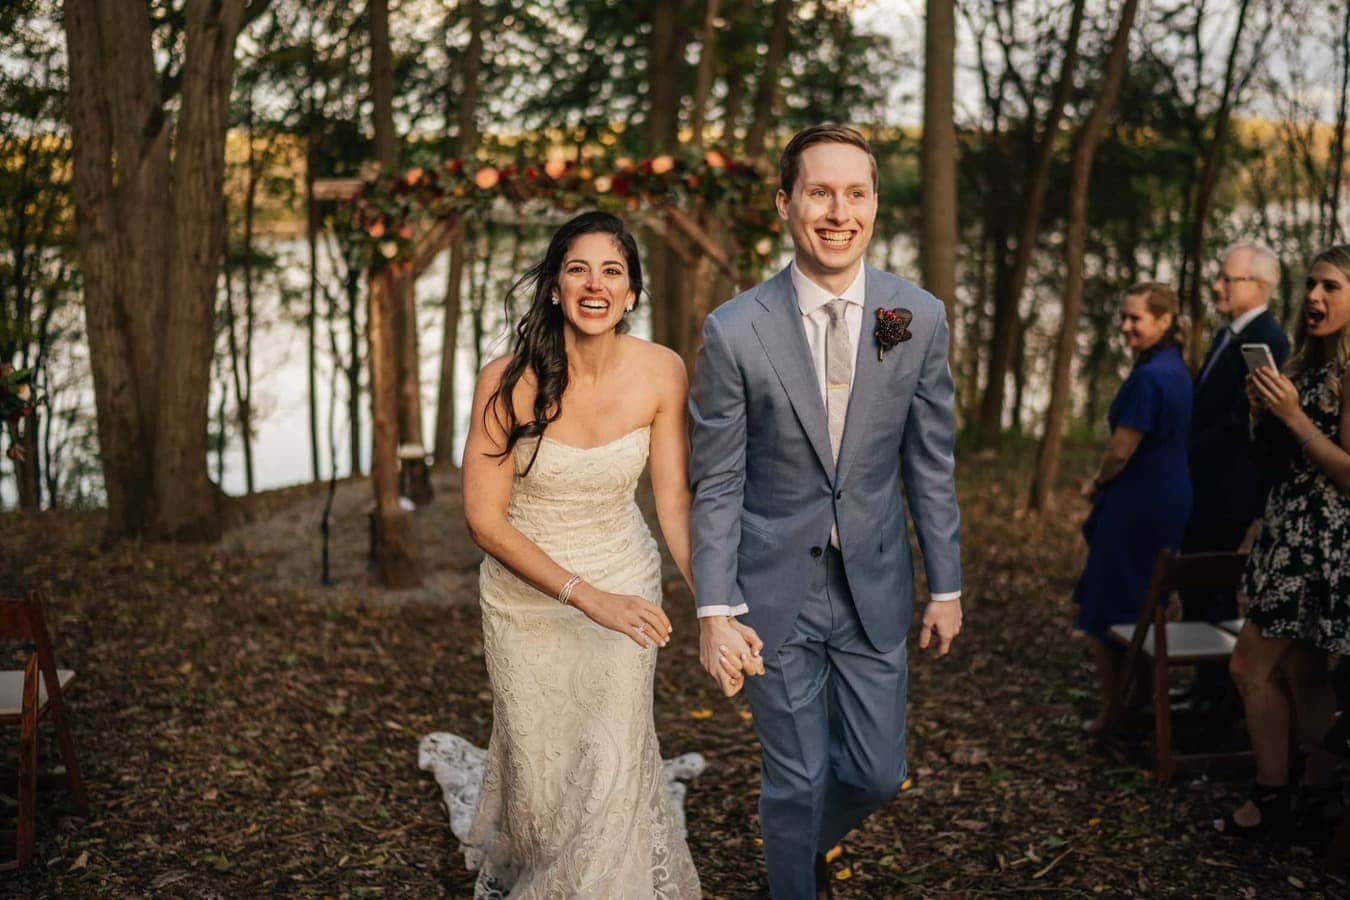 Bride and groom smile excitedly as they walk down the aisle together after their Catskill wedding venue ends.